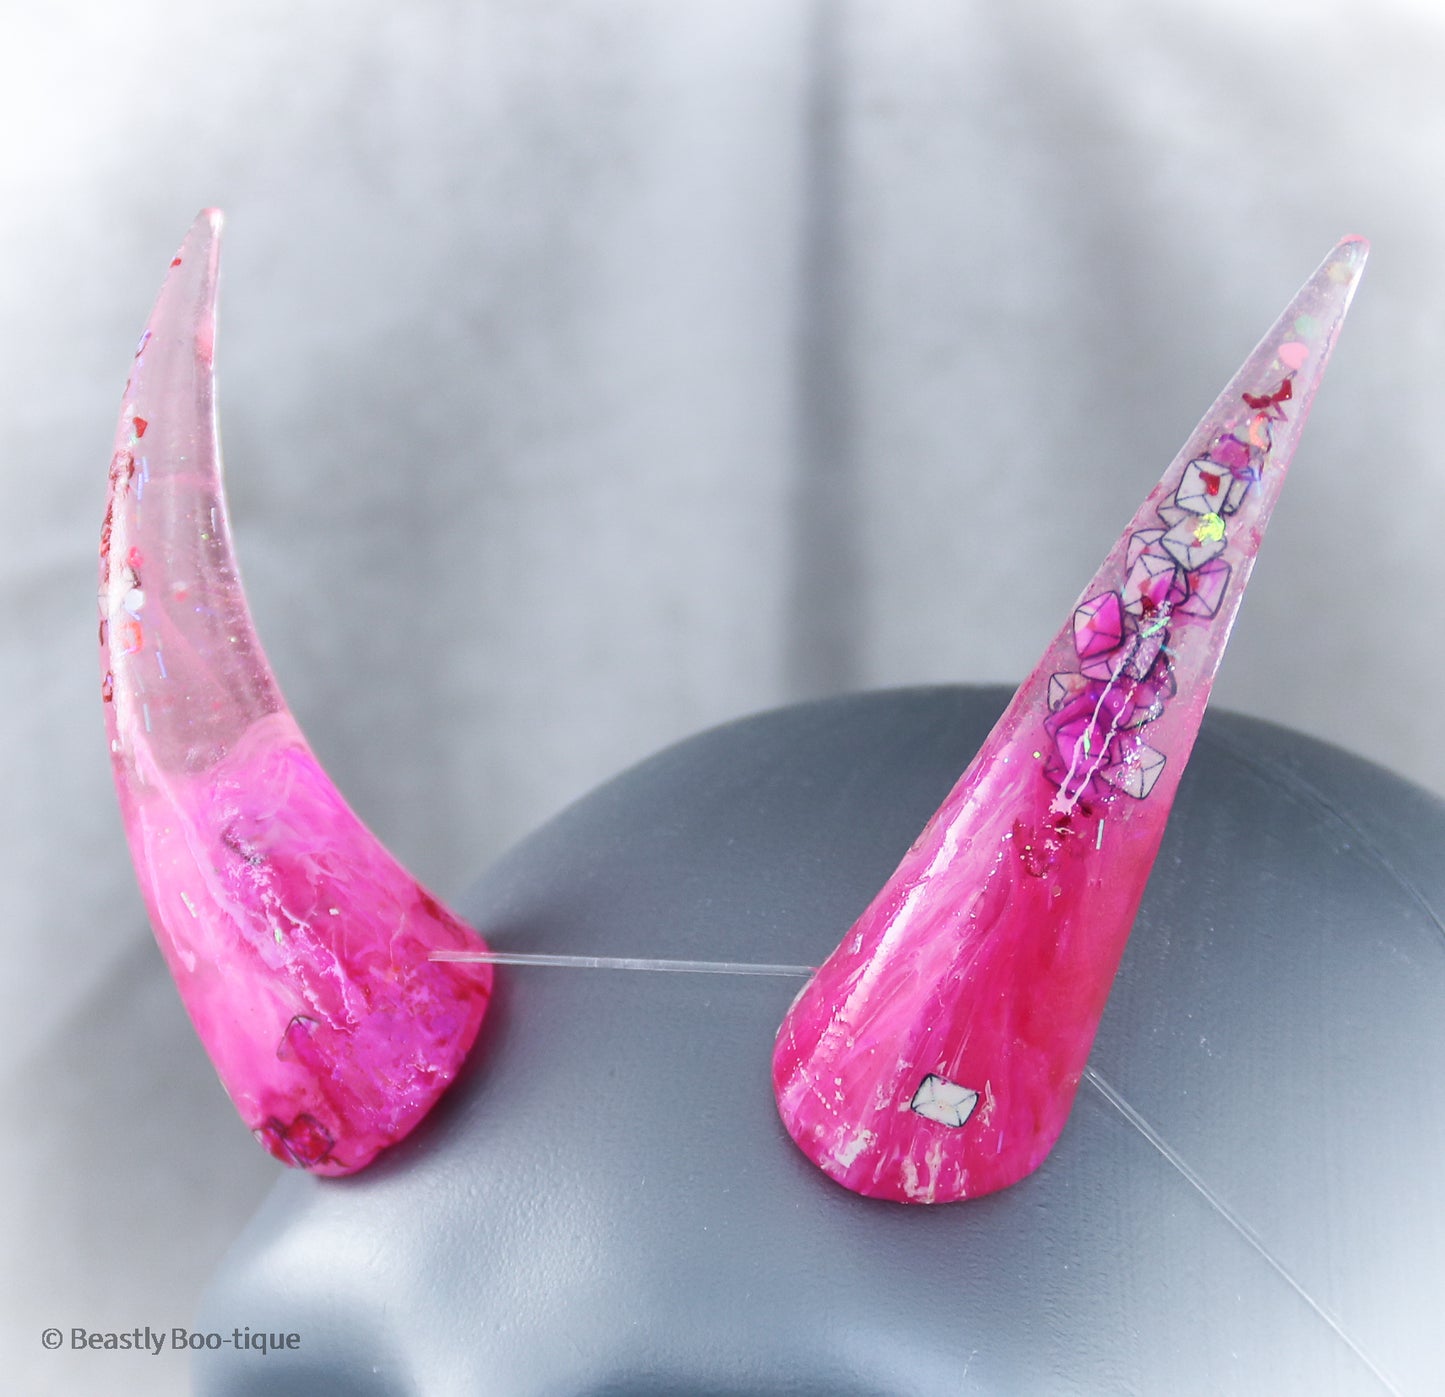 LIMITED EDITION Love Letters Specialty Color Cast Resin Horns